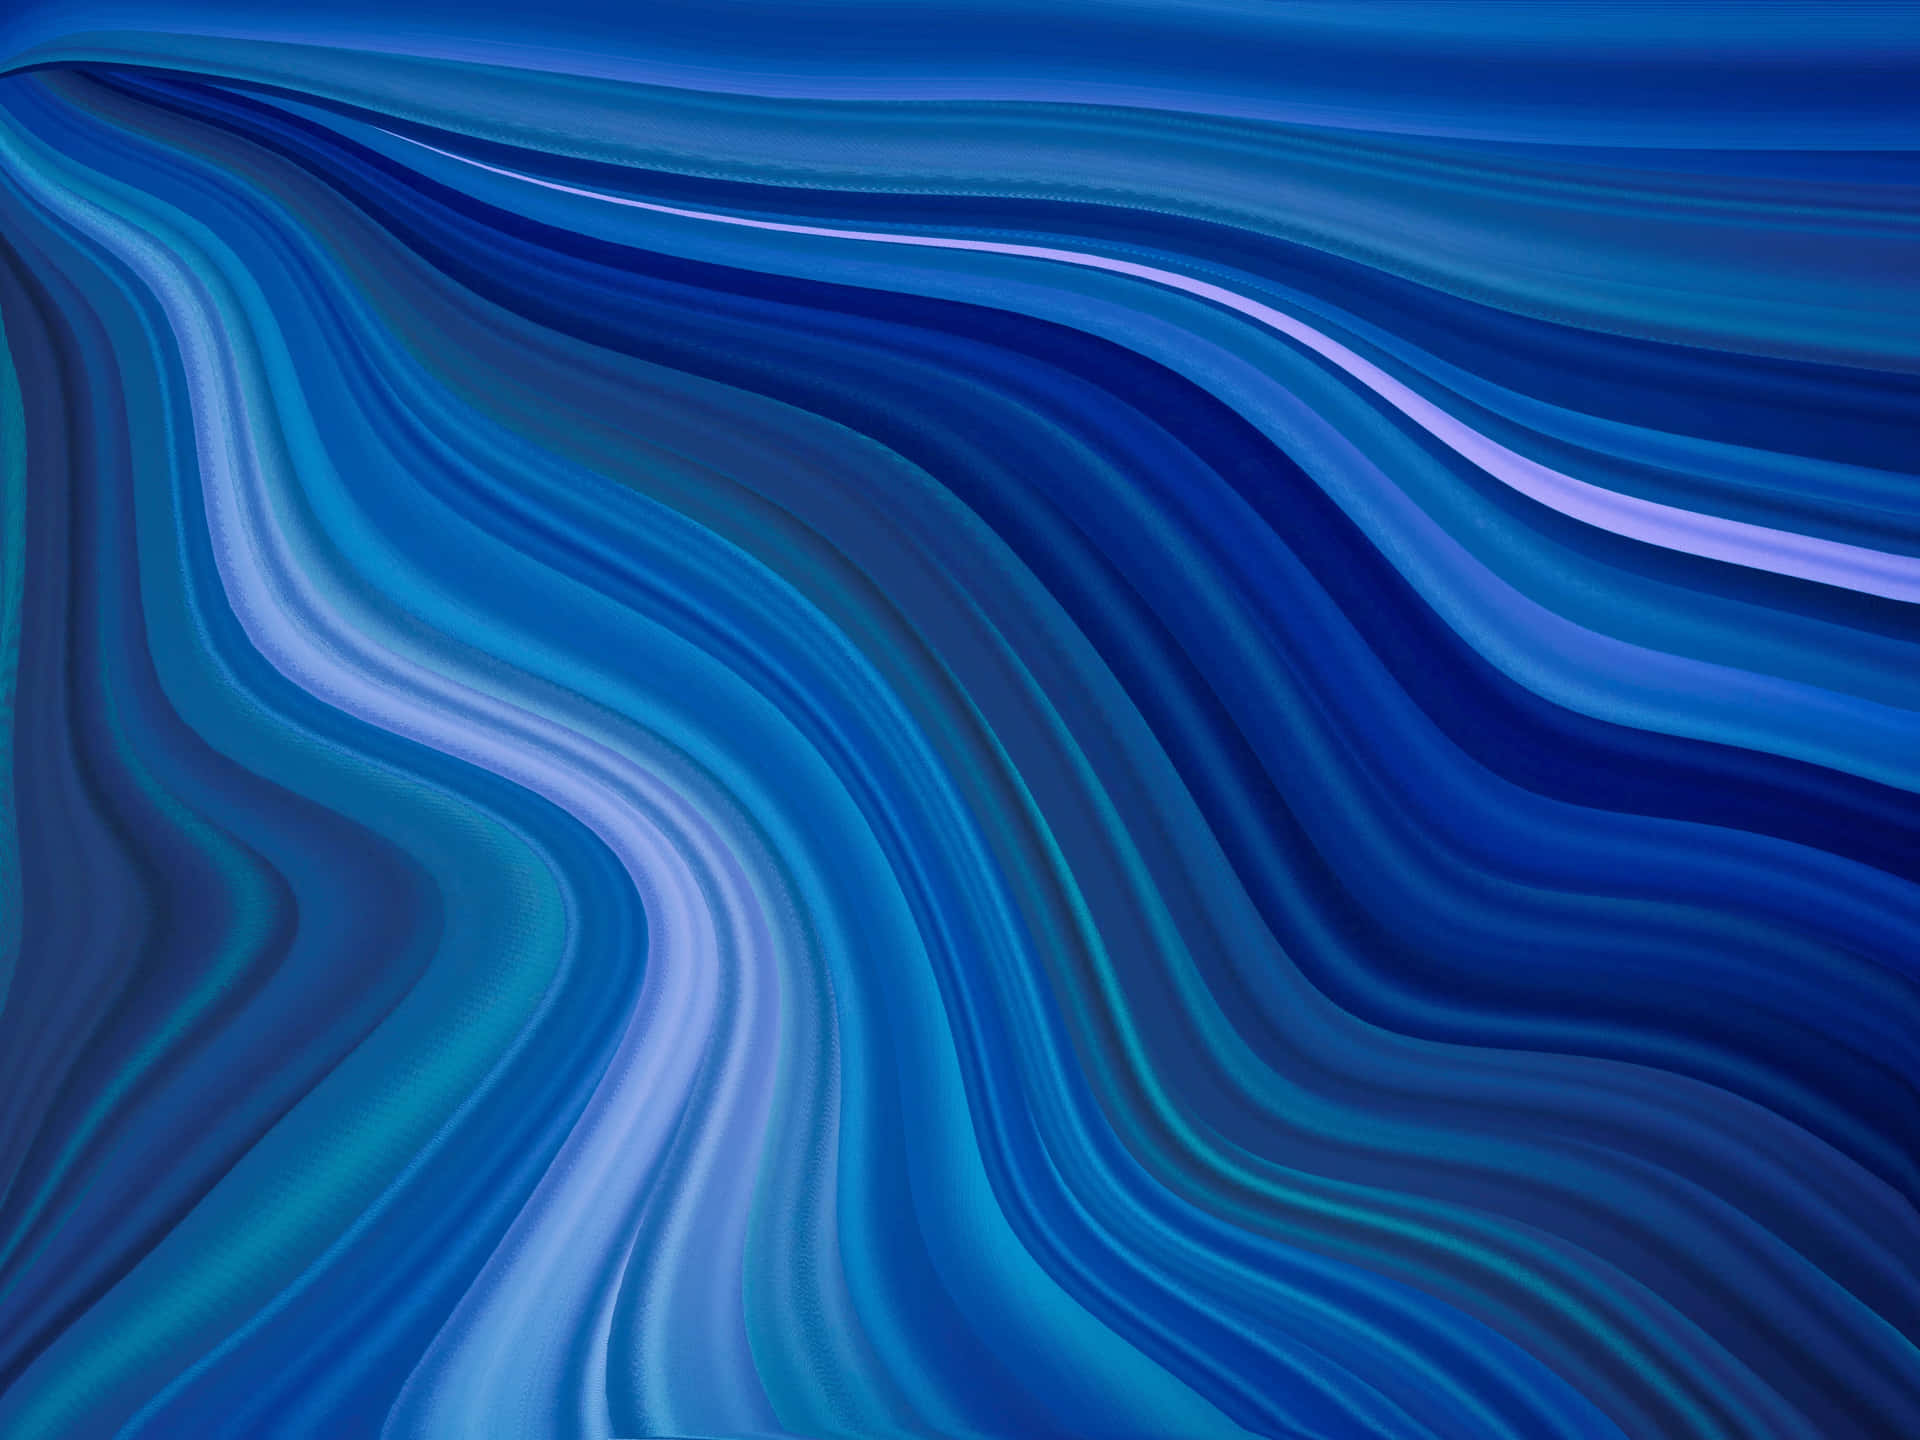 Texture of blue and white wavy lines